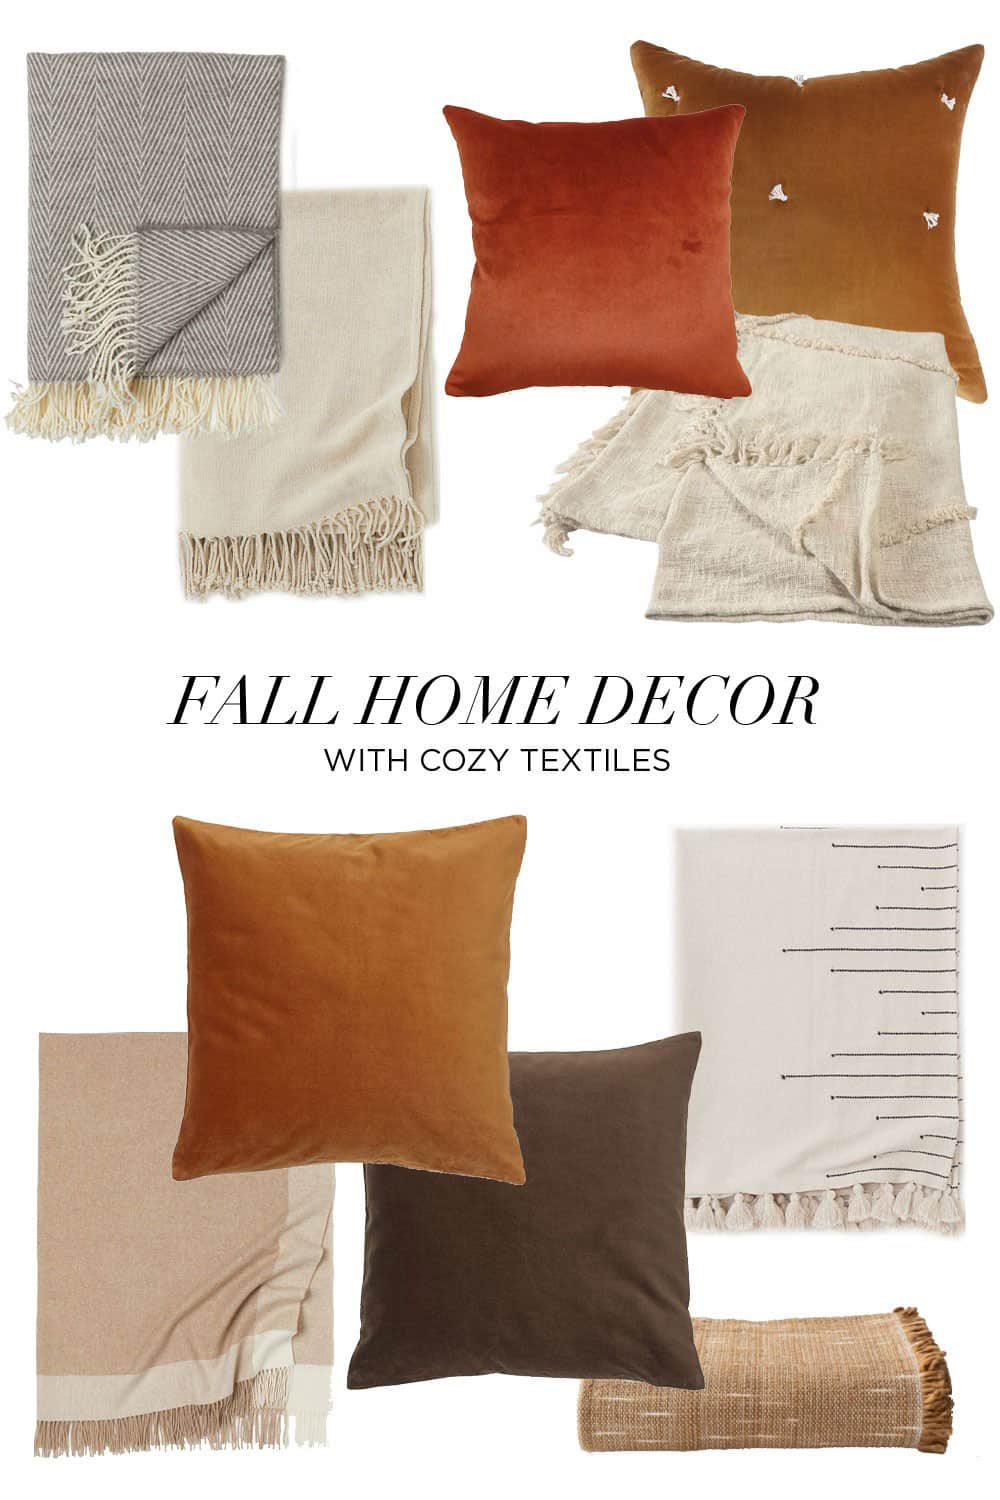 Fall Home Decor - Cozy up your home for fall with these pillows and soft throws